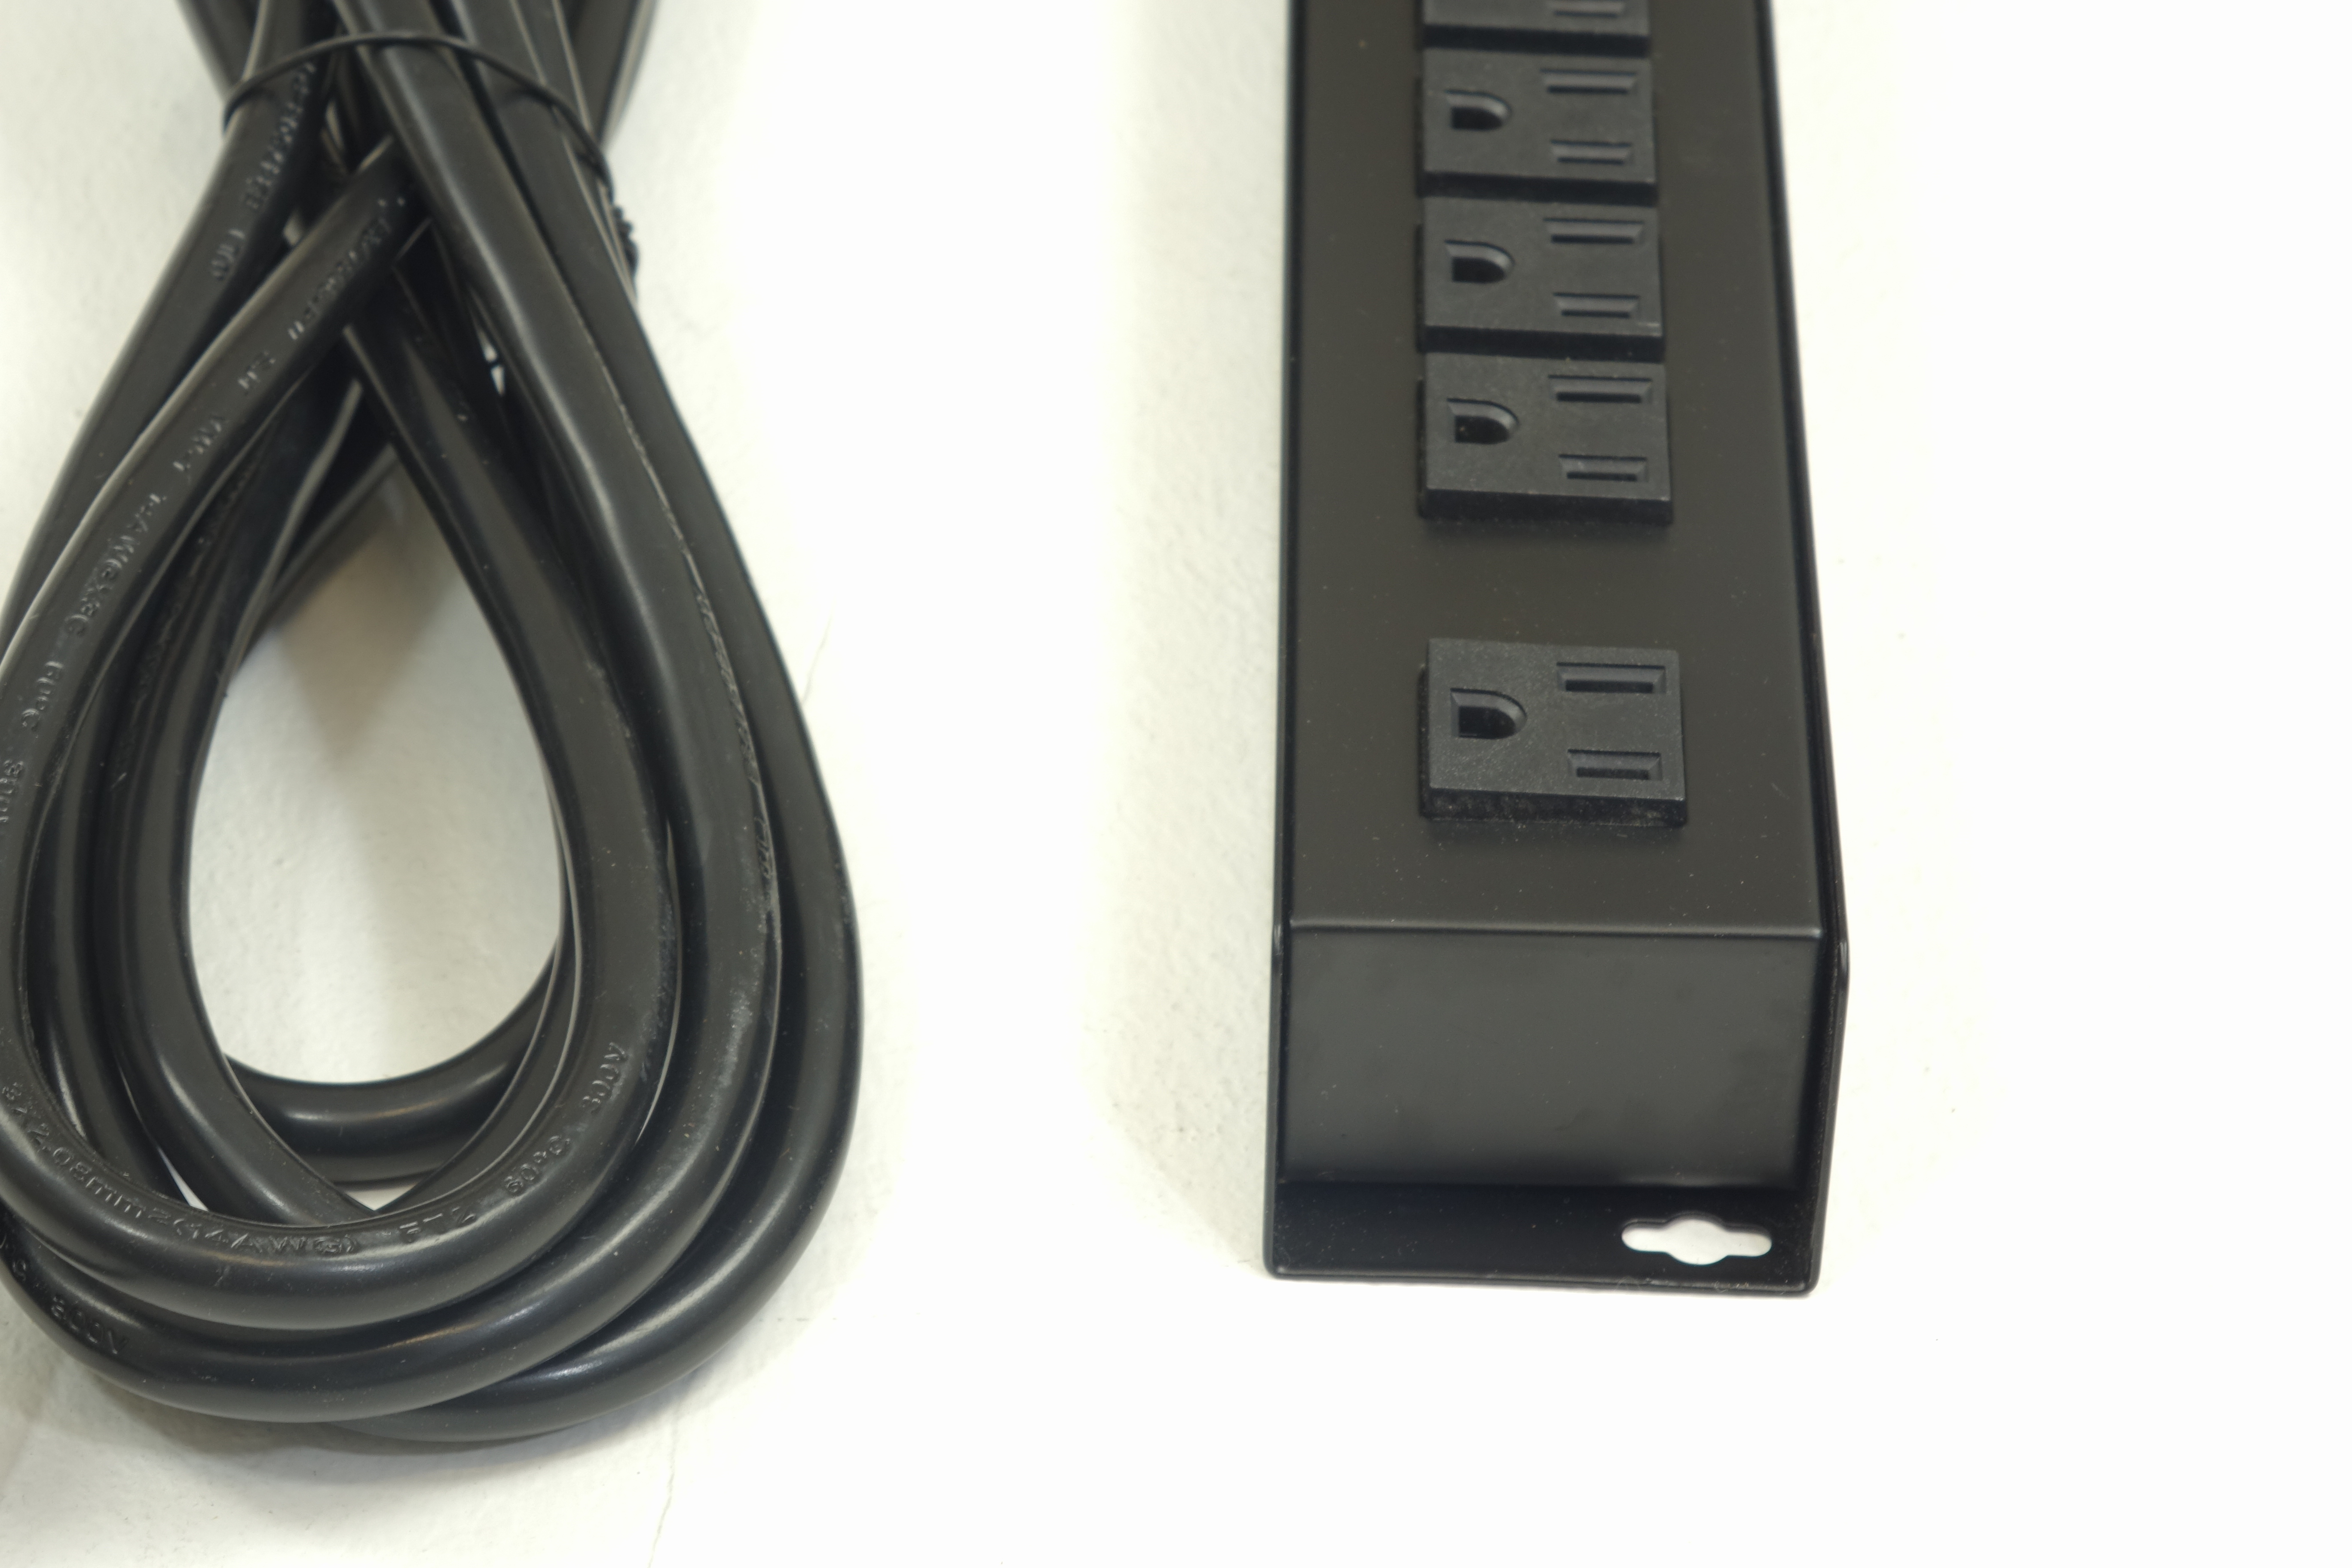 Mountable Power Strip Surge Protector With 6 Outlets Ed Surge 615